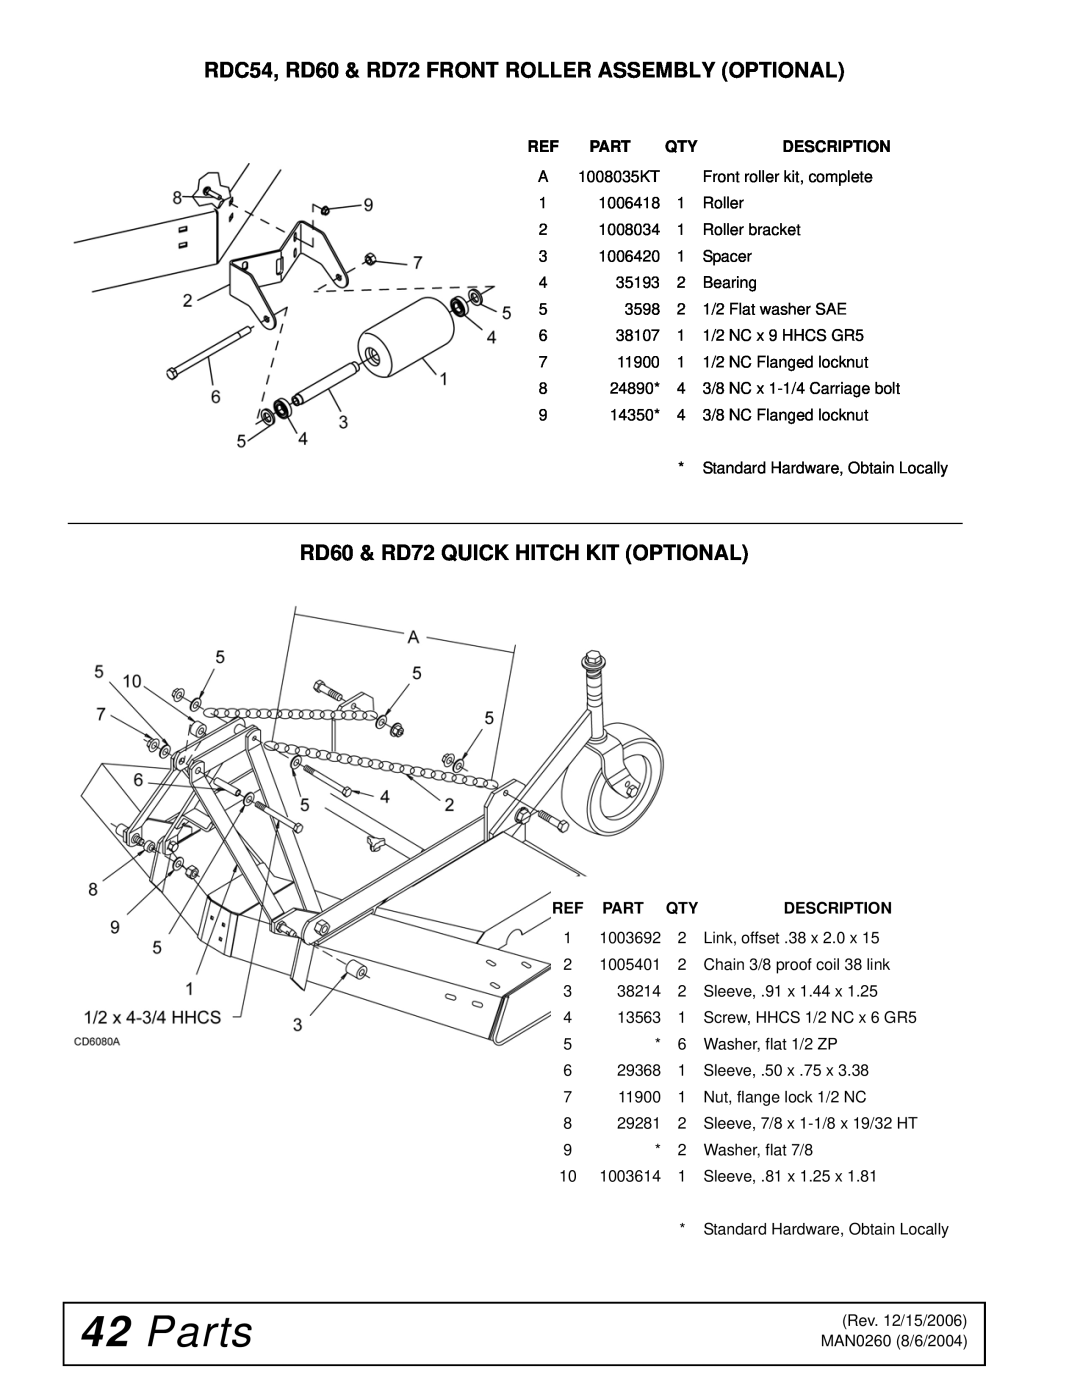 Woods Equipment manual 42Parts, RDC54, RD60 & RD72 FRONT ROLLER ASSEMBLY OPTIONAL, RD60 & RD72 QUICK HITCH KIT OPTIONAL 